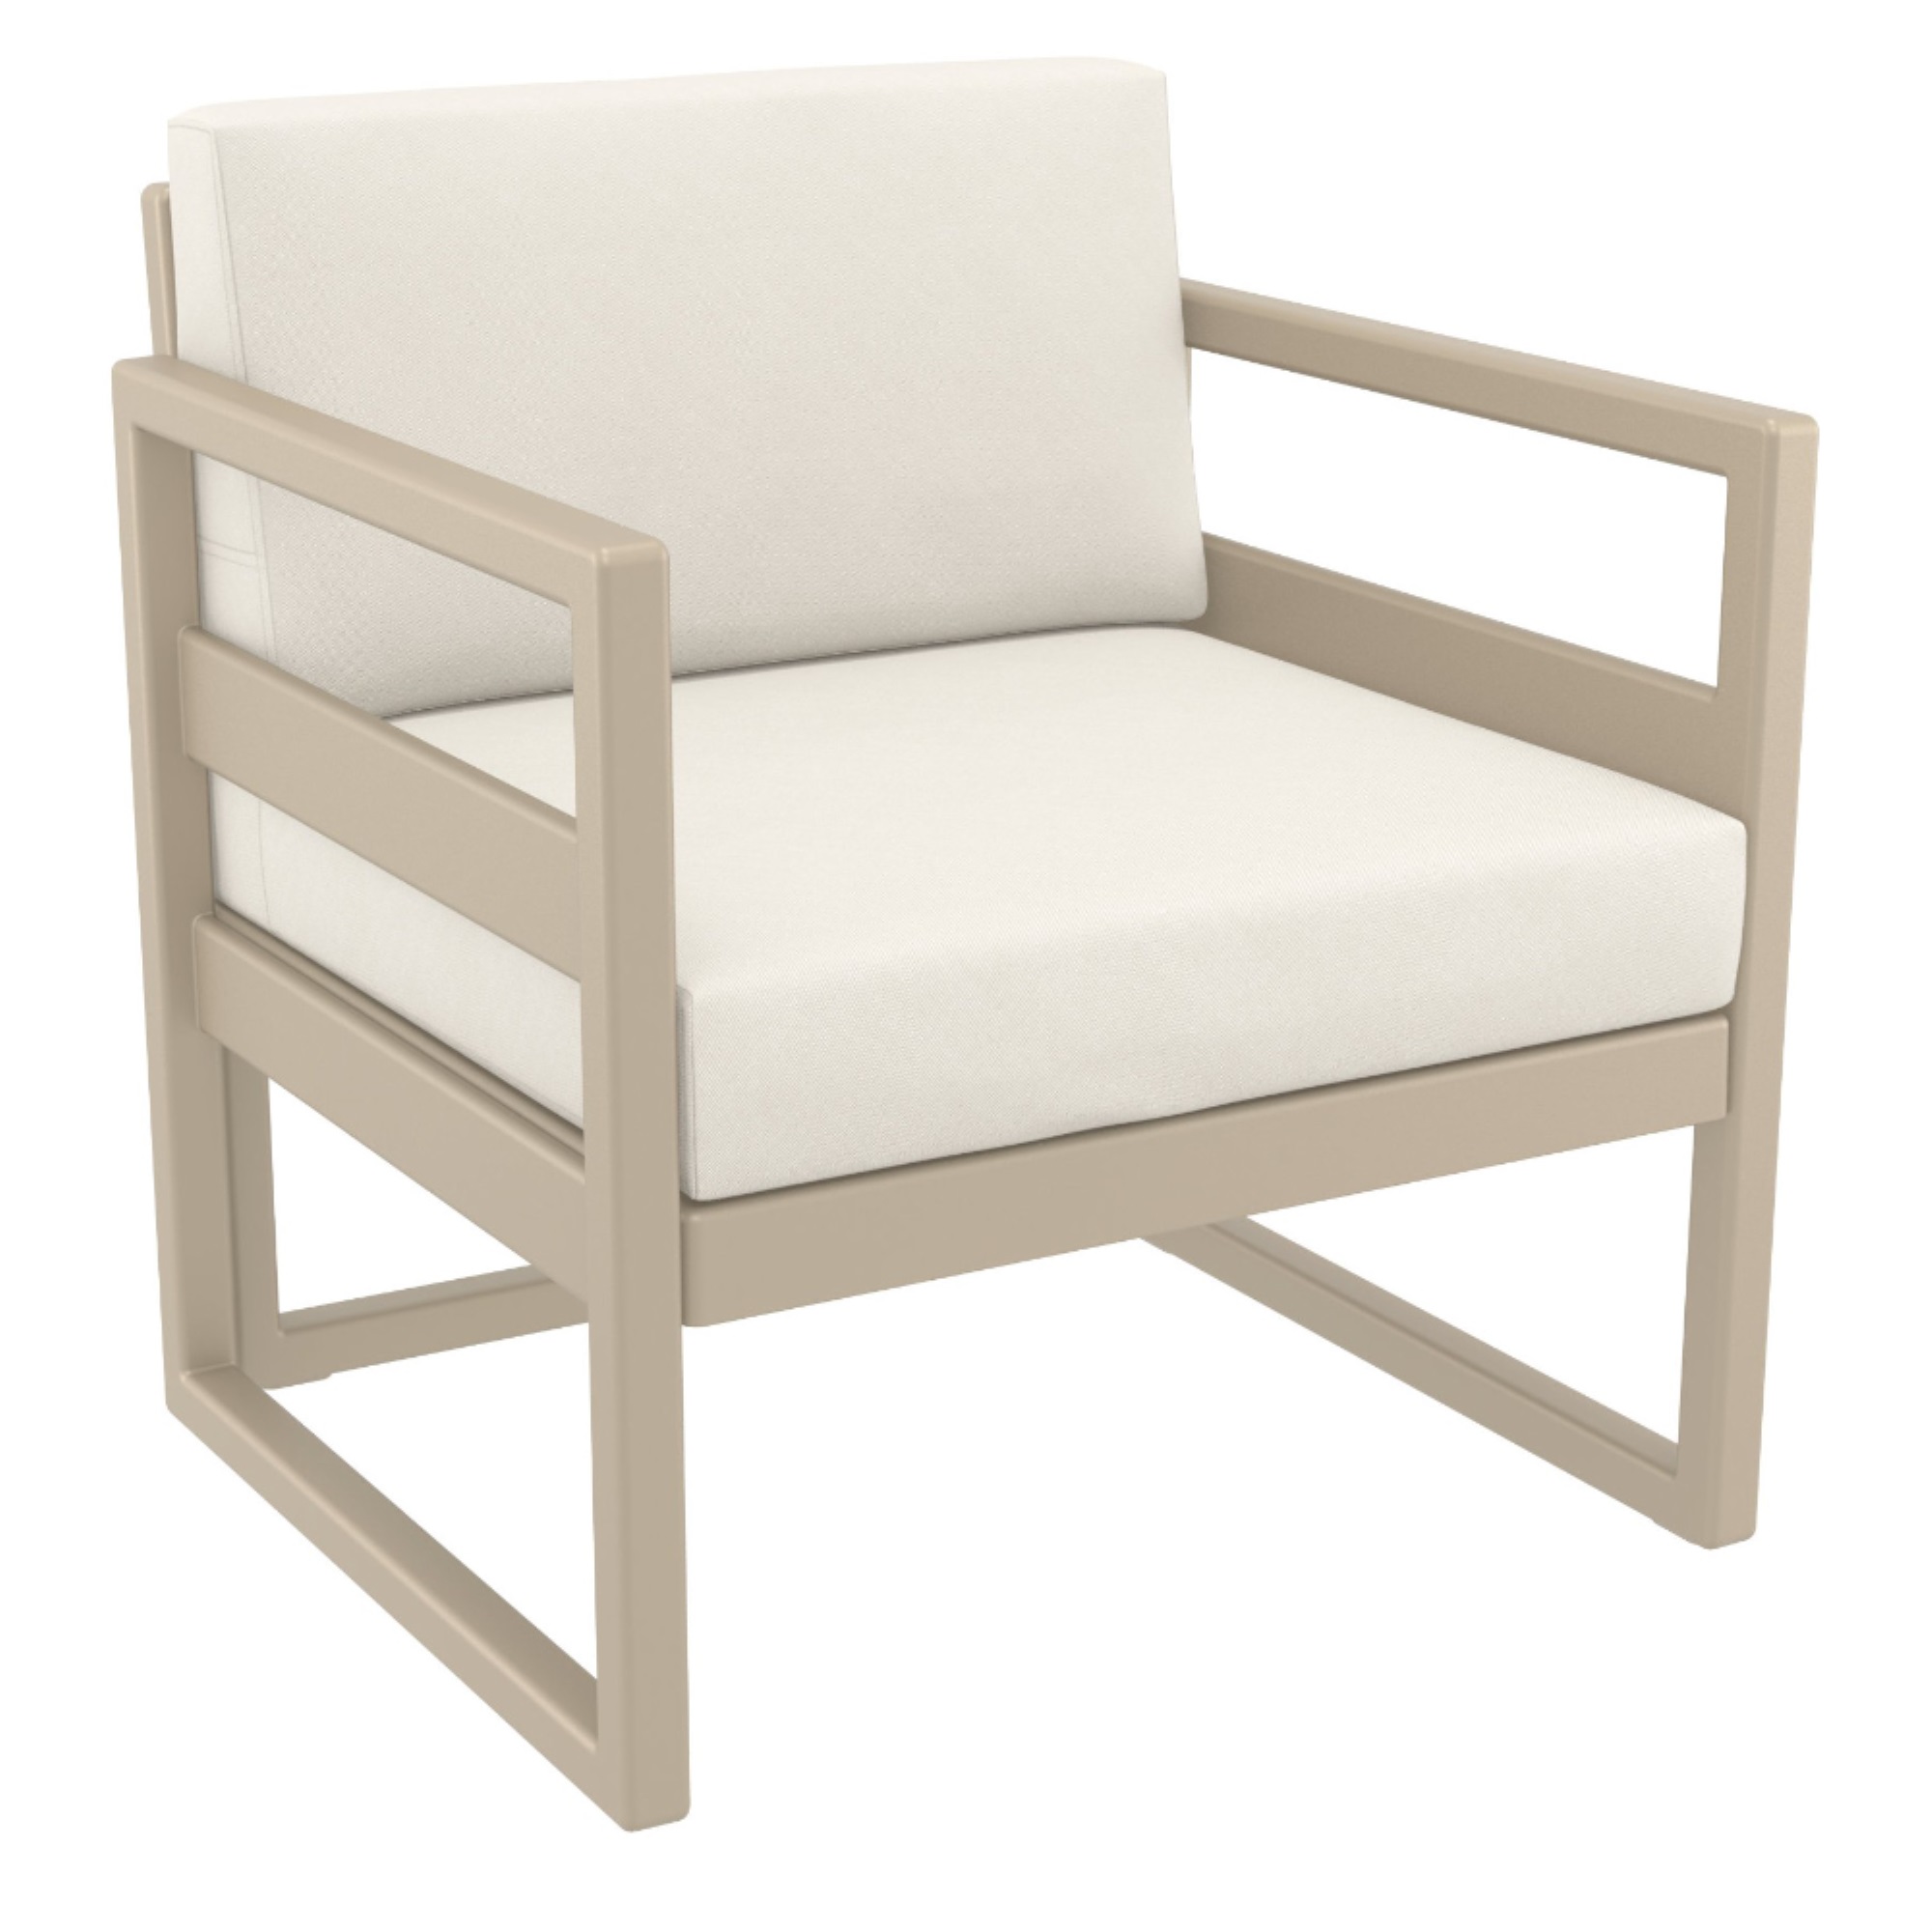 Mykonos Patio Club Chair Taupe with Acrylic Fabric Natural Cushions - image 1 of 2